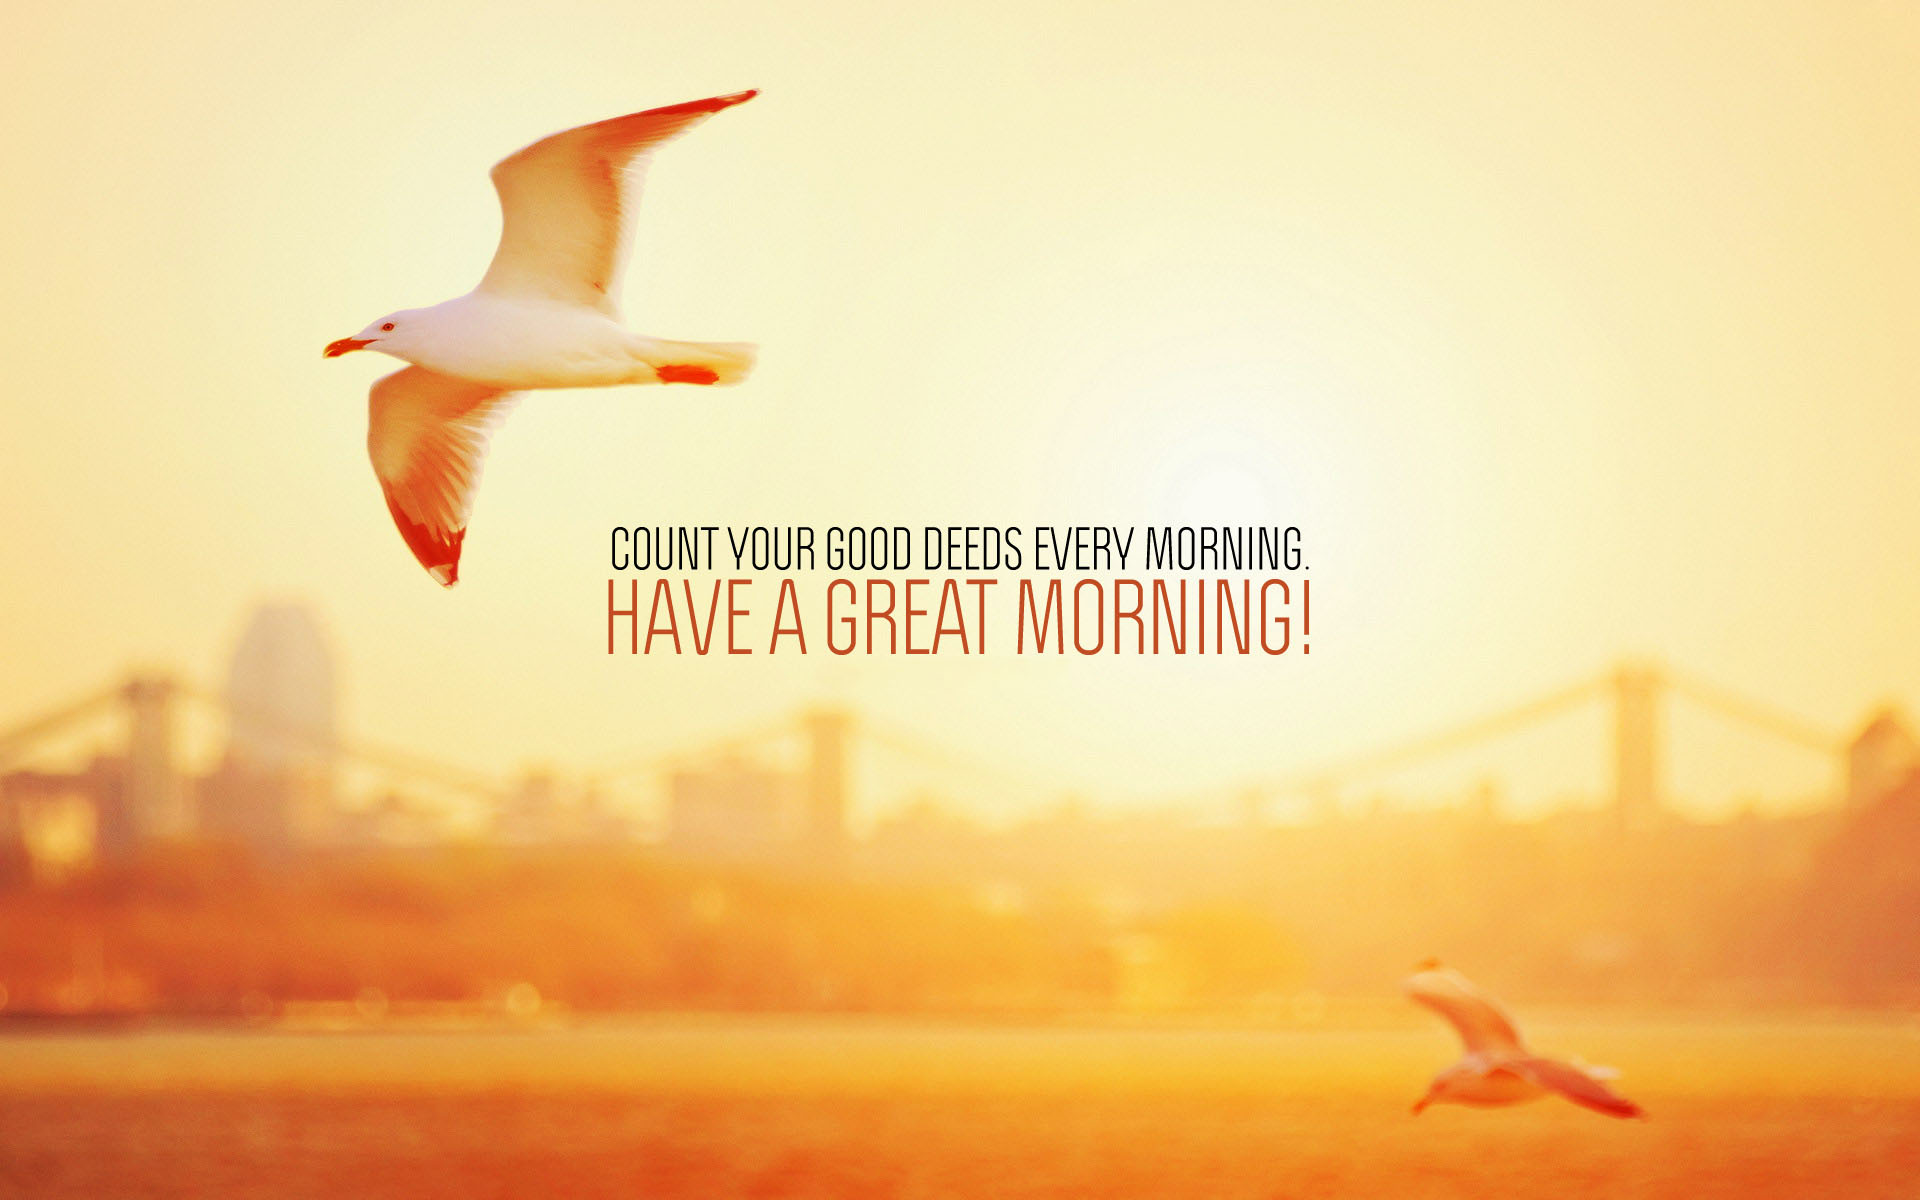 Have A Great Day Hd - HD Wallpaper 